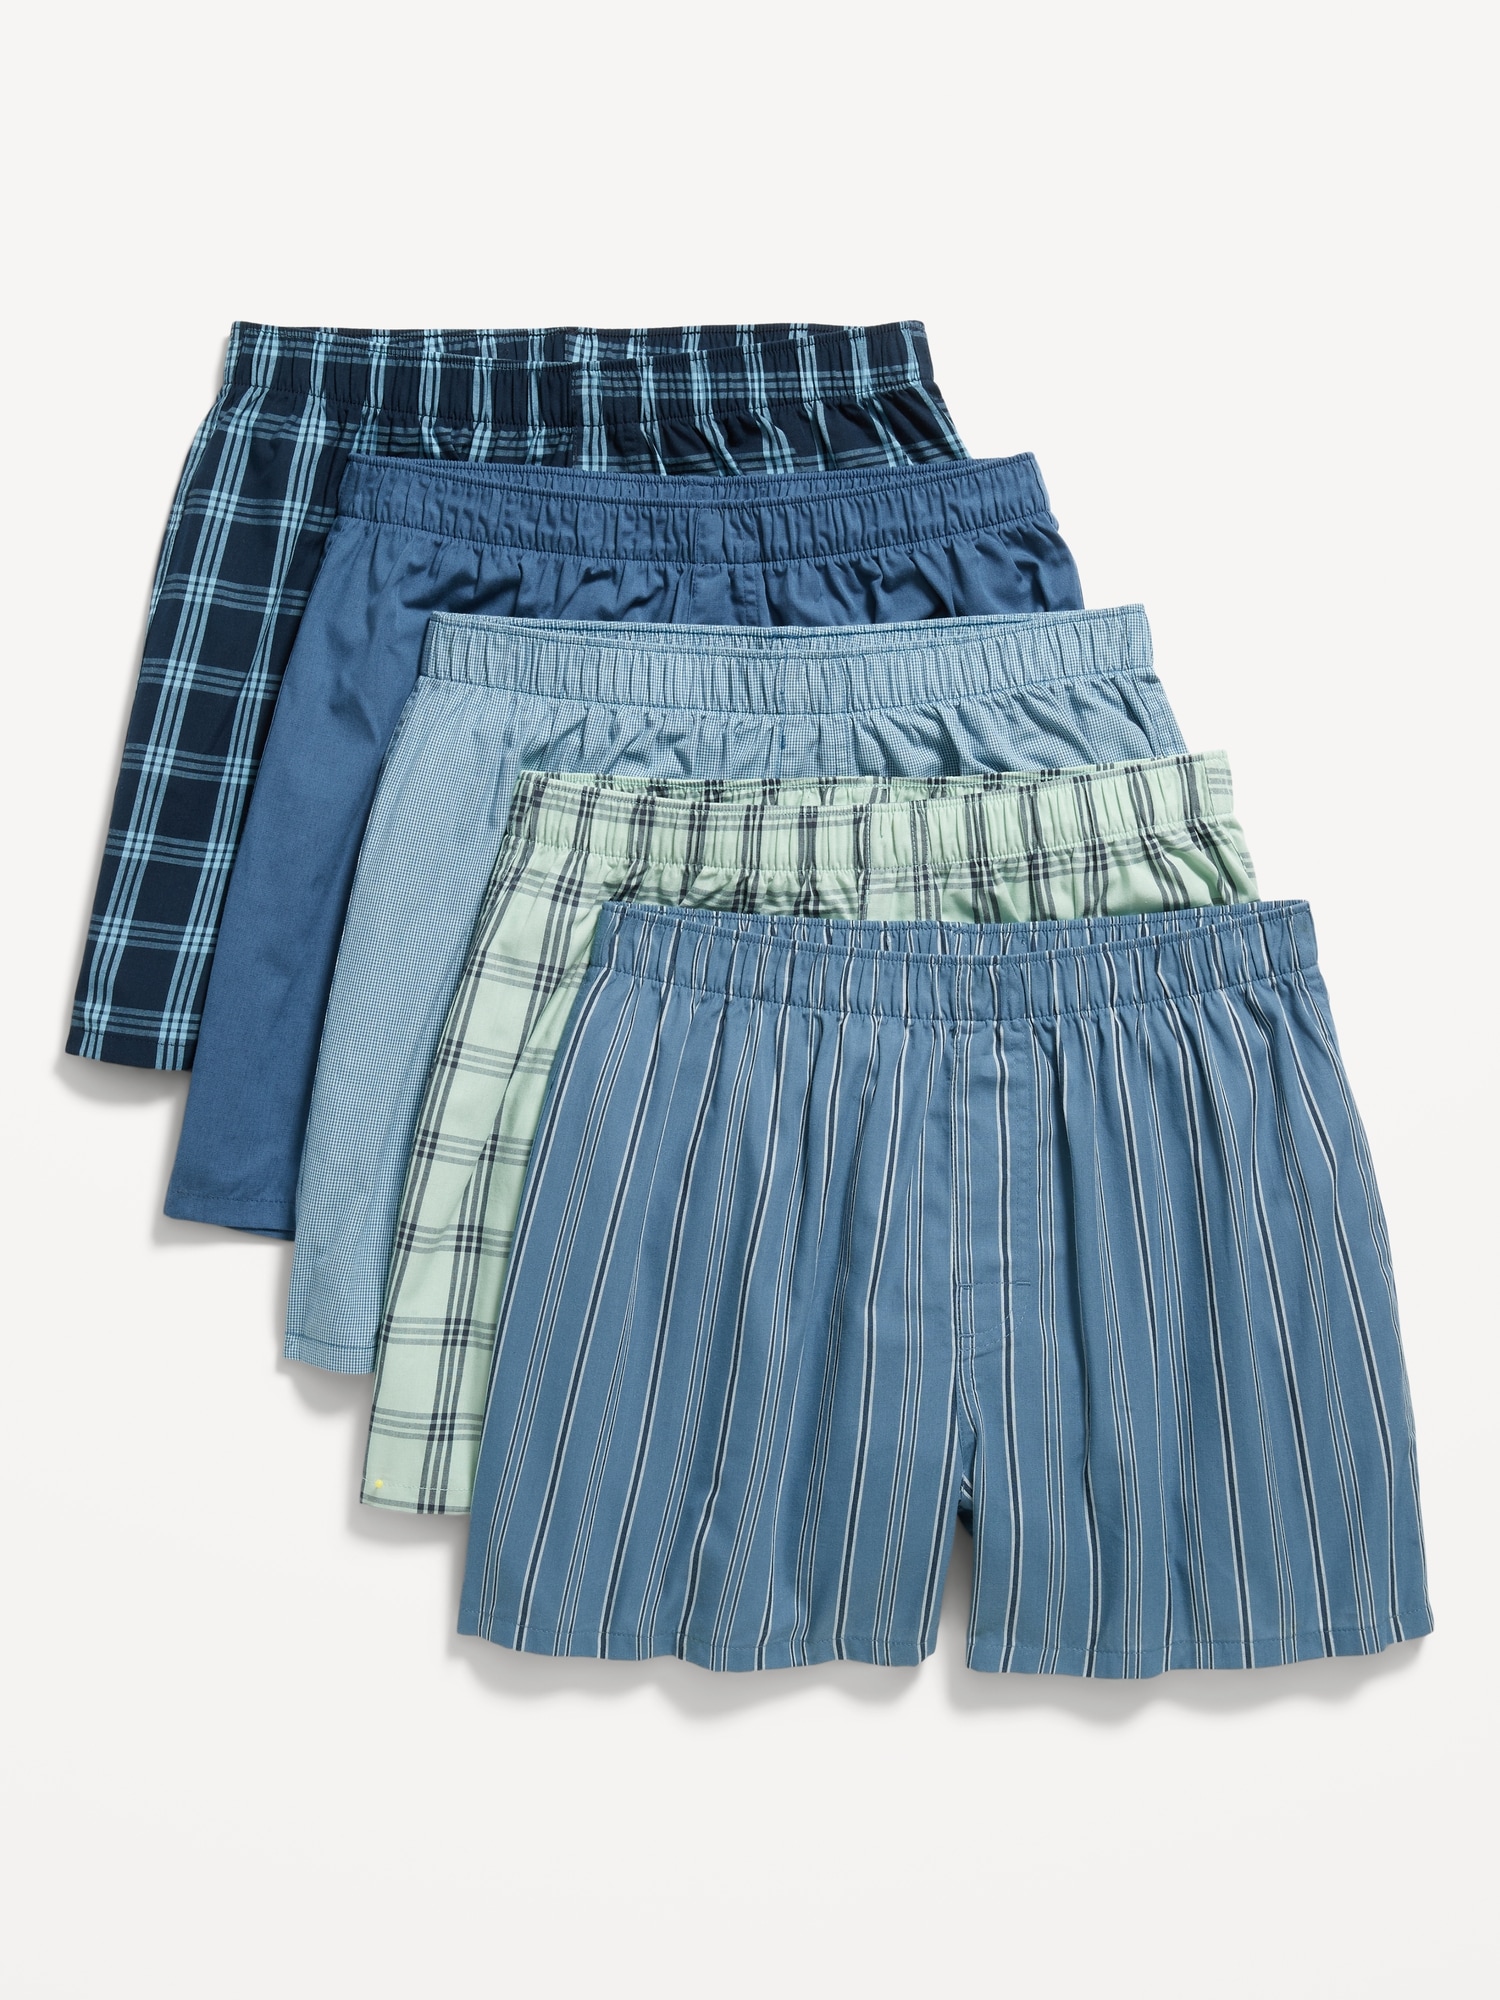 5-Pack Soft-Washed Boxer Shorts -- 3.75-inch inseam